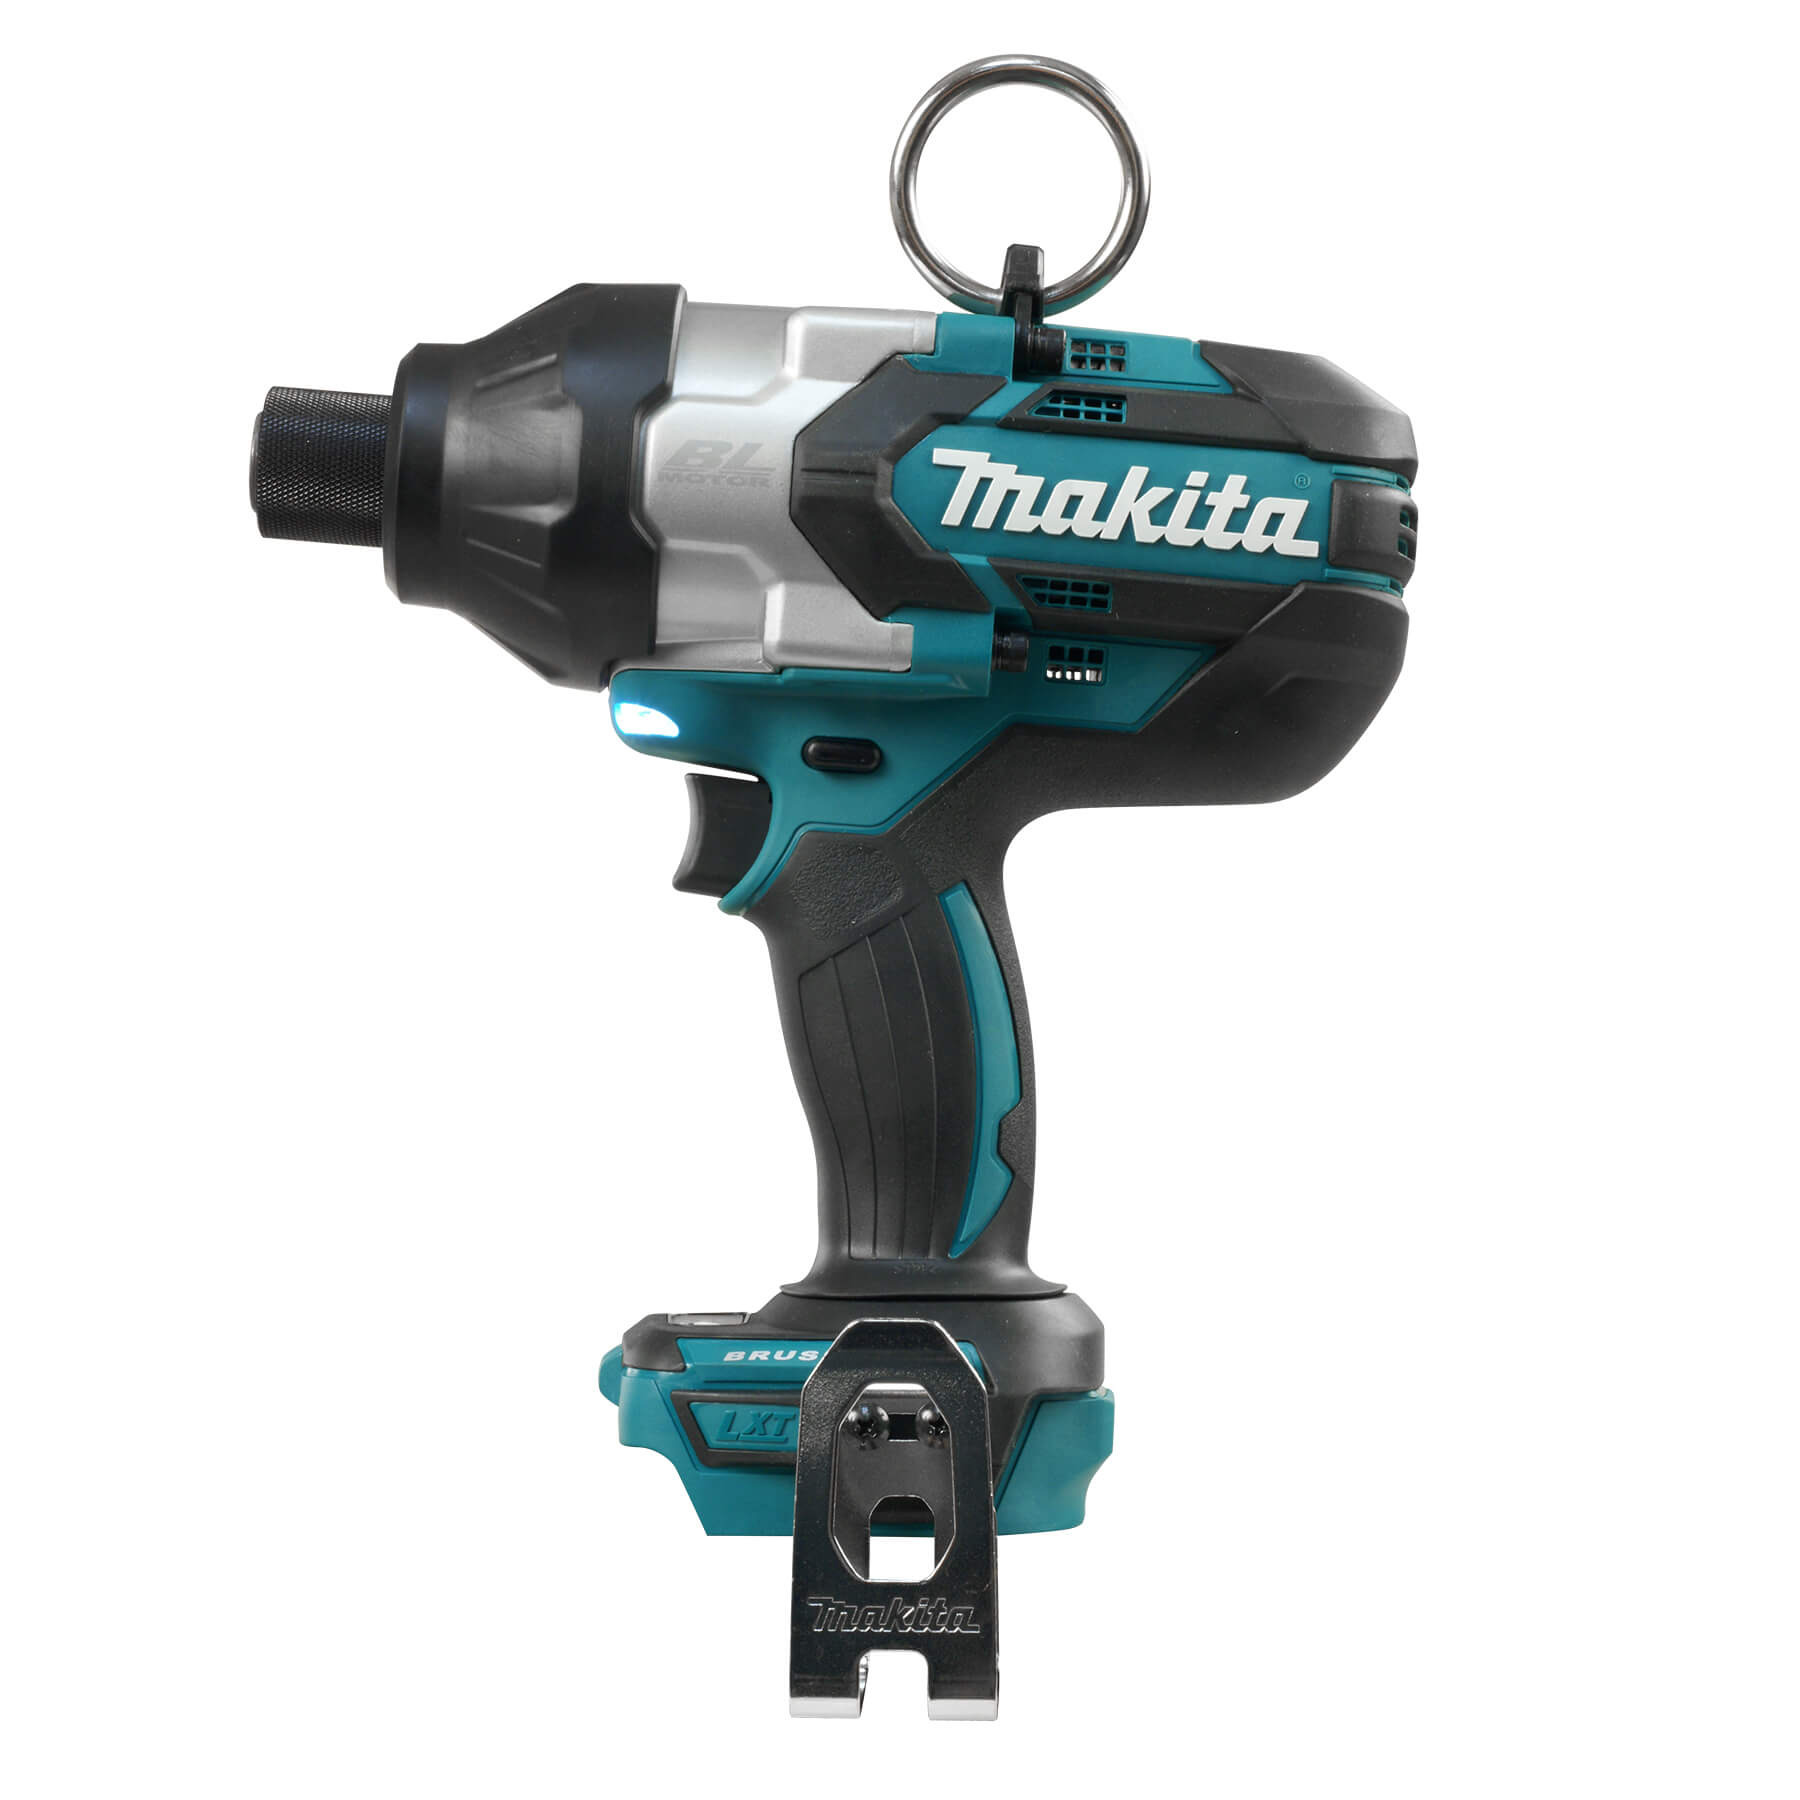 Makita DTW800Z - 18V LXT 7/16" High Torque Brushless Impact - wise-line-tools